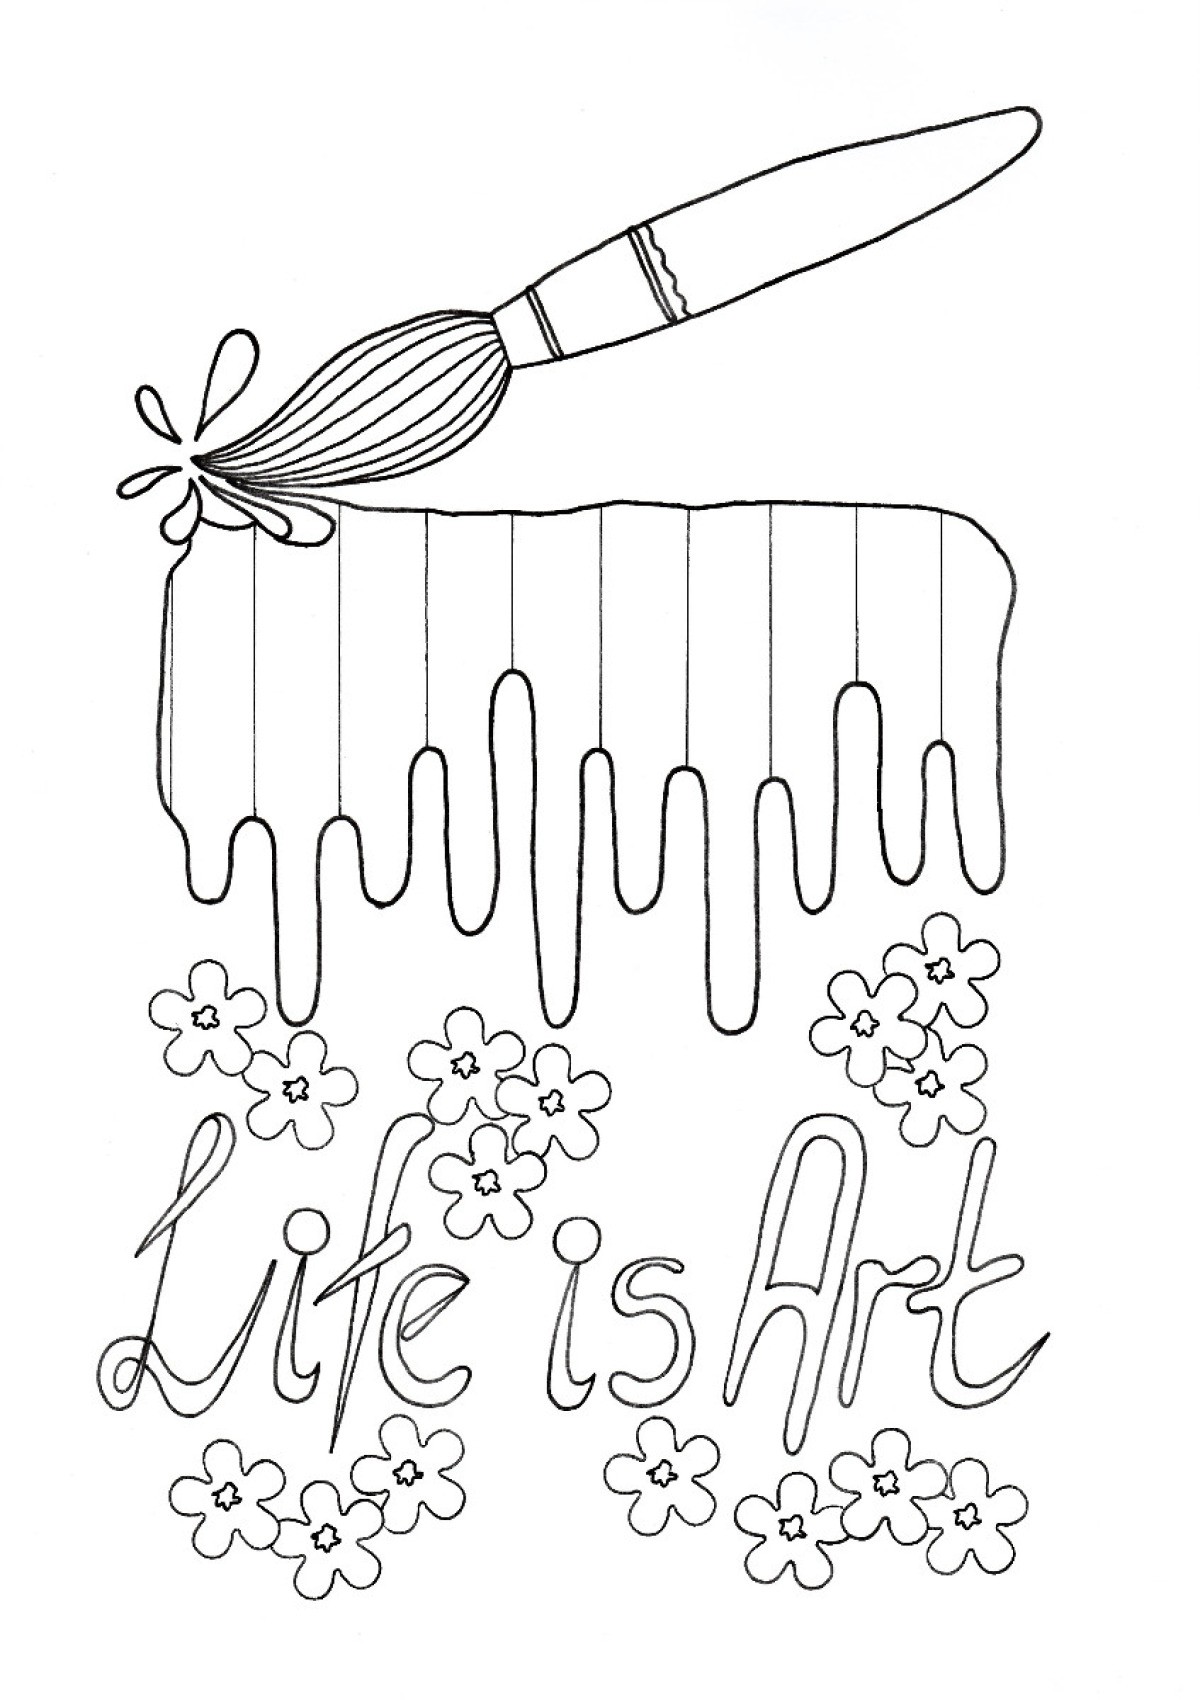 "Life Is Art" Kids' Coloring Page | ThriftyFun